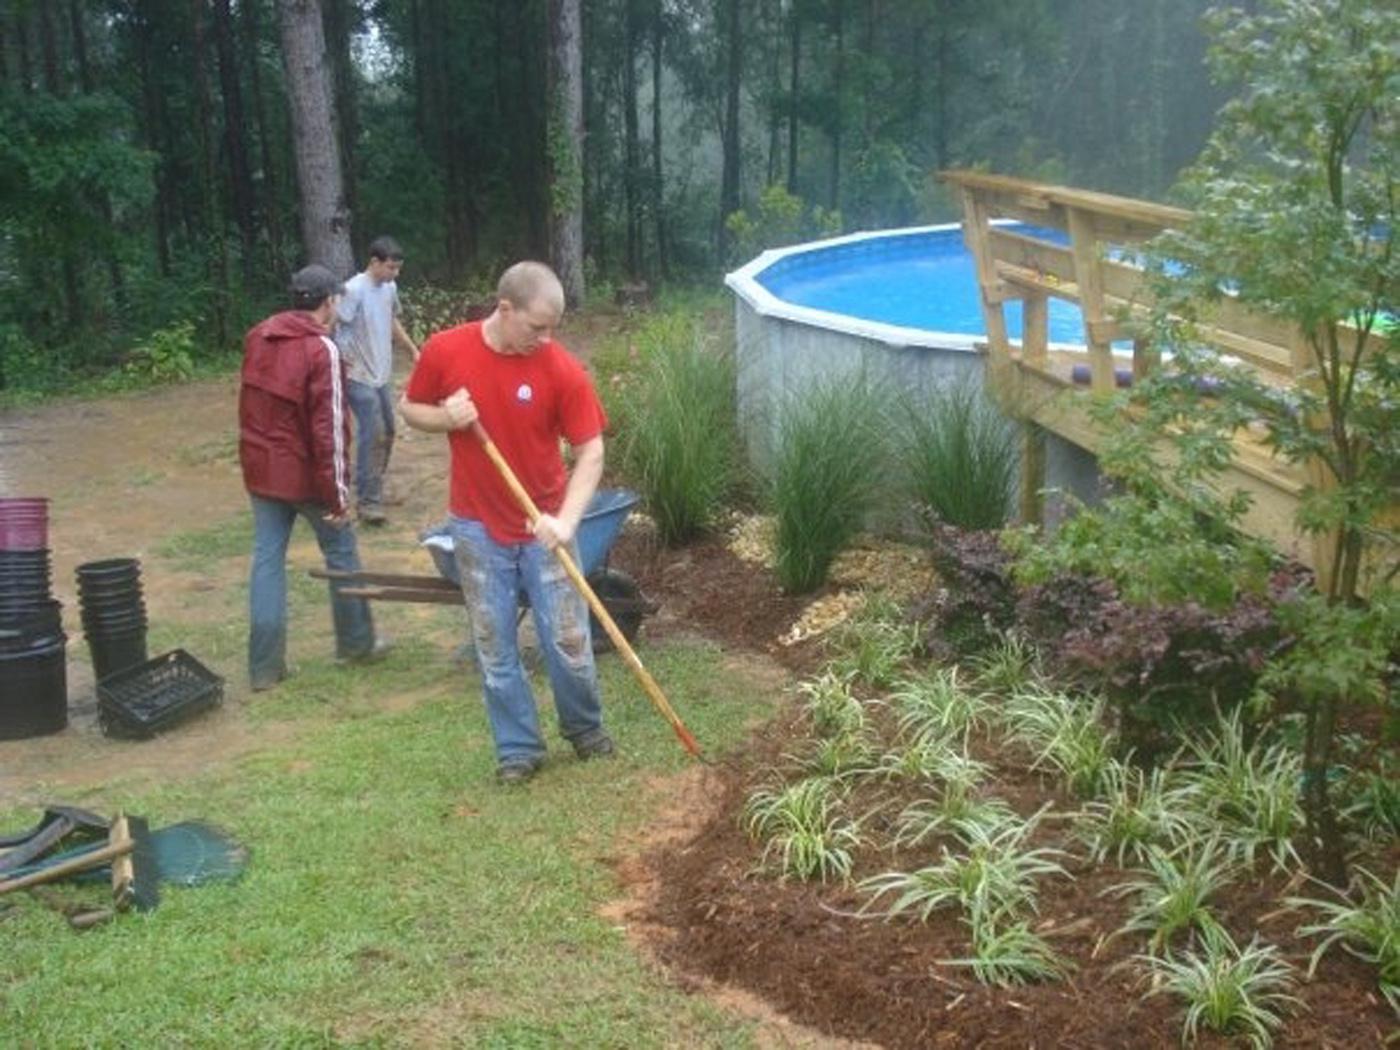 Mississippi State University's Landscape Architecture Delegates volunteered to help the family of a young girl with a serious nerve disorder. David Russell, Dustin Randall and Dale Brasher place plants around the family's pool to keep the soil intact. With the erosion problem solved, the girl can continue her regular pool therapy to ease her chronic pain.